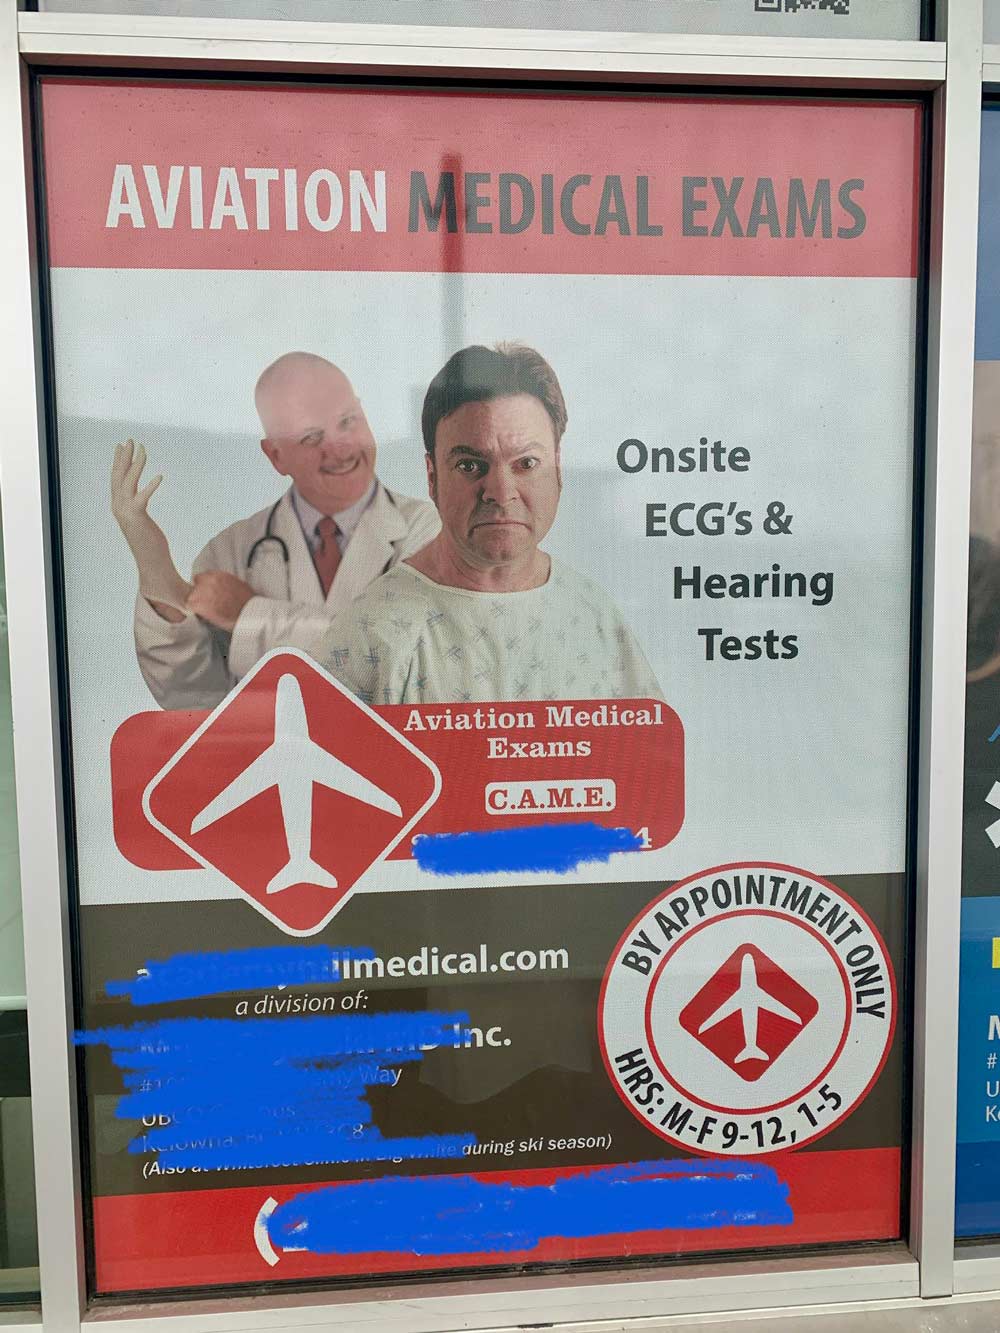 The photo that this medical clinic used. They do mainly ECGs and hearing assessments